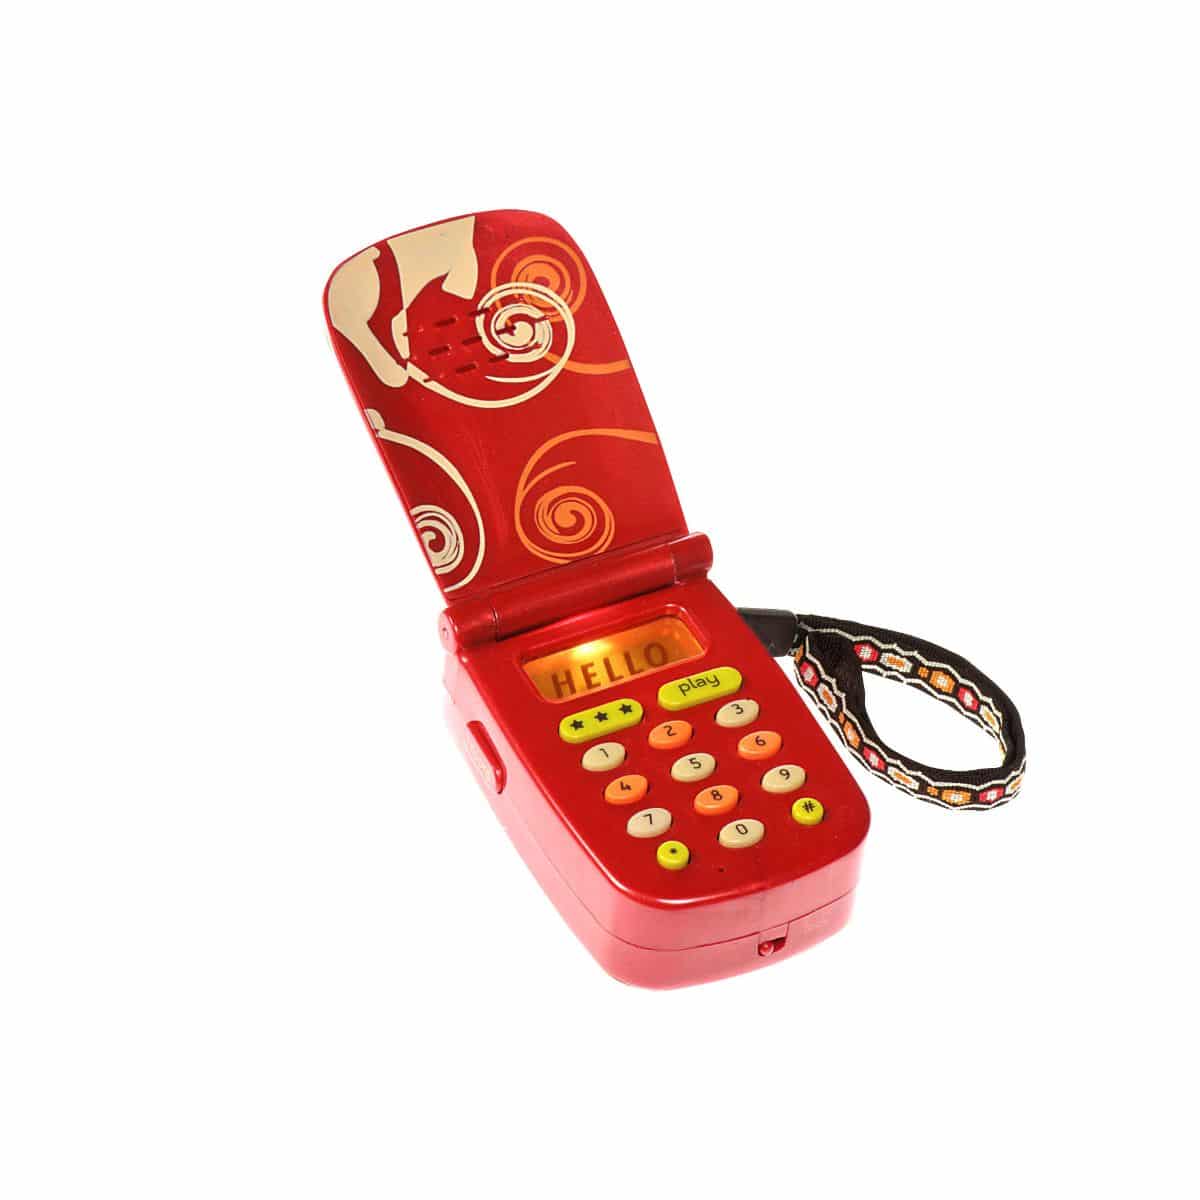 Red toy cellphone.